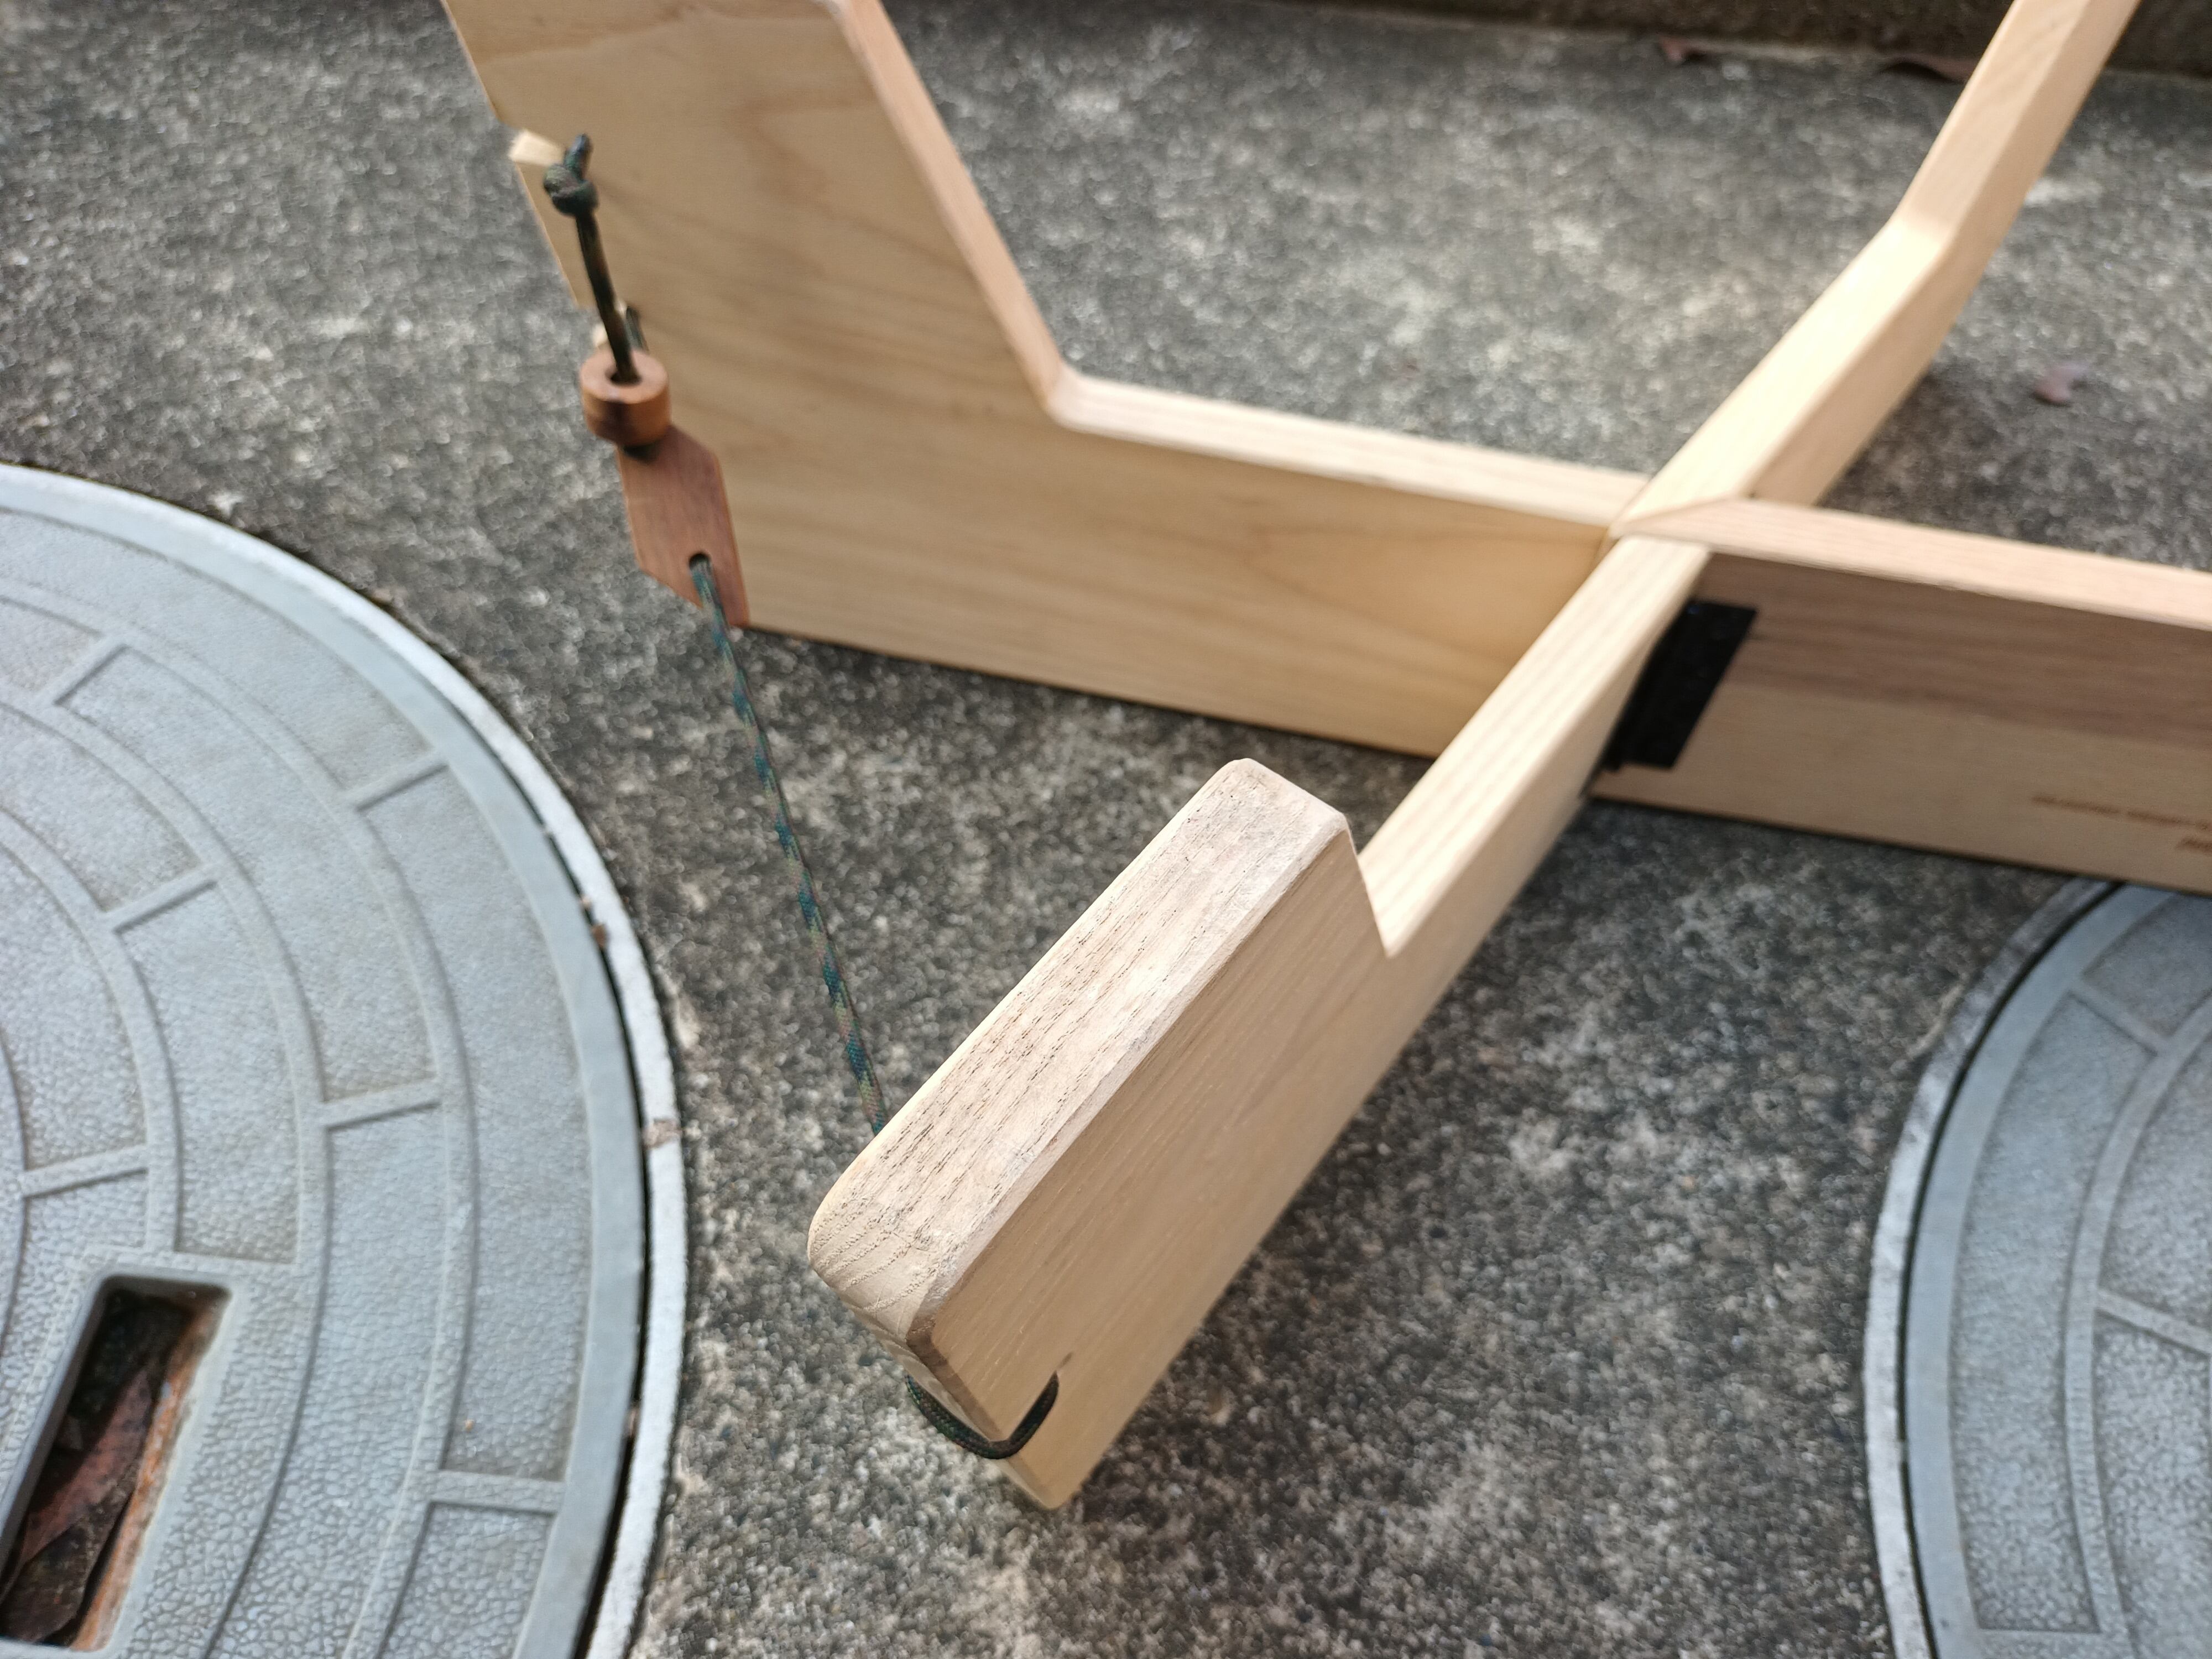 Shim.craft（シムクラフト）Xleg stand | Outdoor Reuse